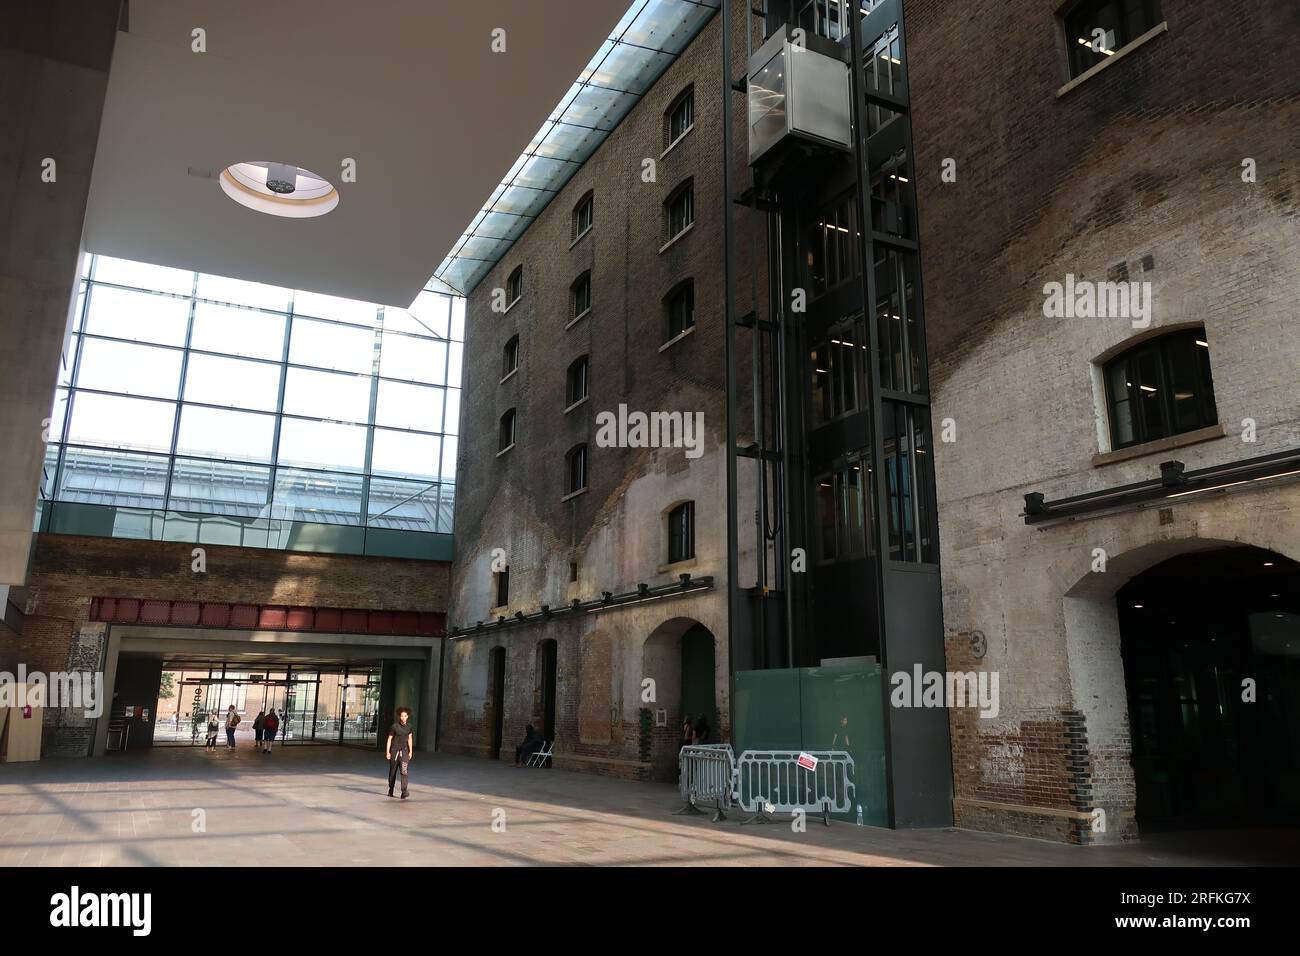 Towering entrance hall in the restored granary building at Central St Martins, a focus for art & design courses at the University of the Arts London. Stock Photo